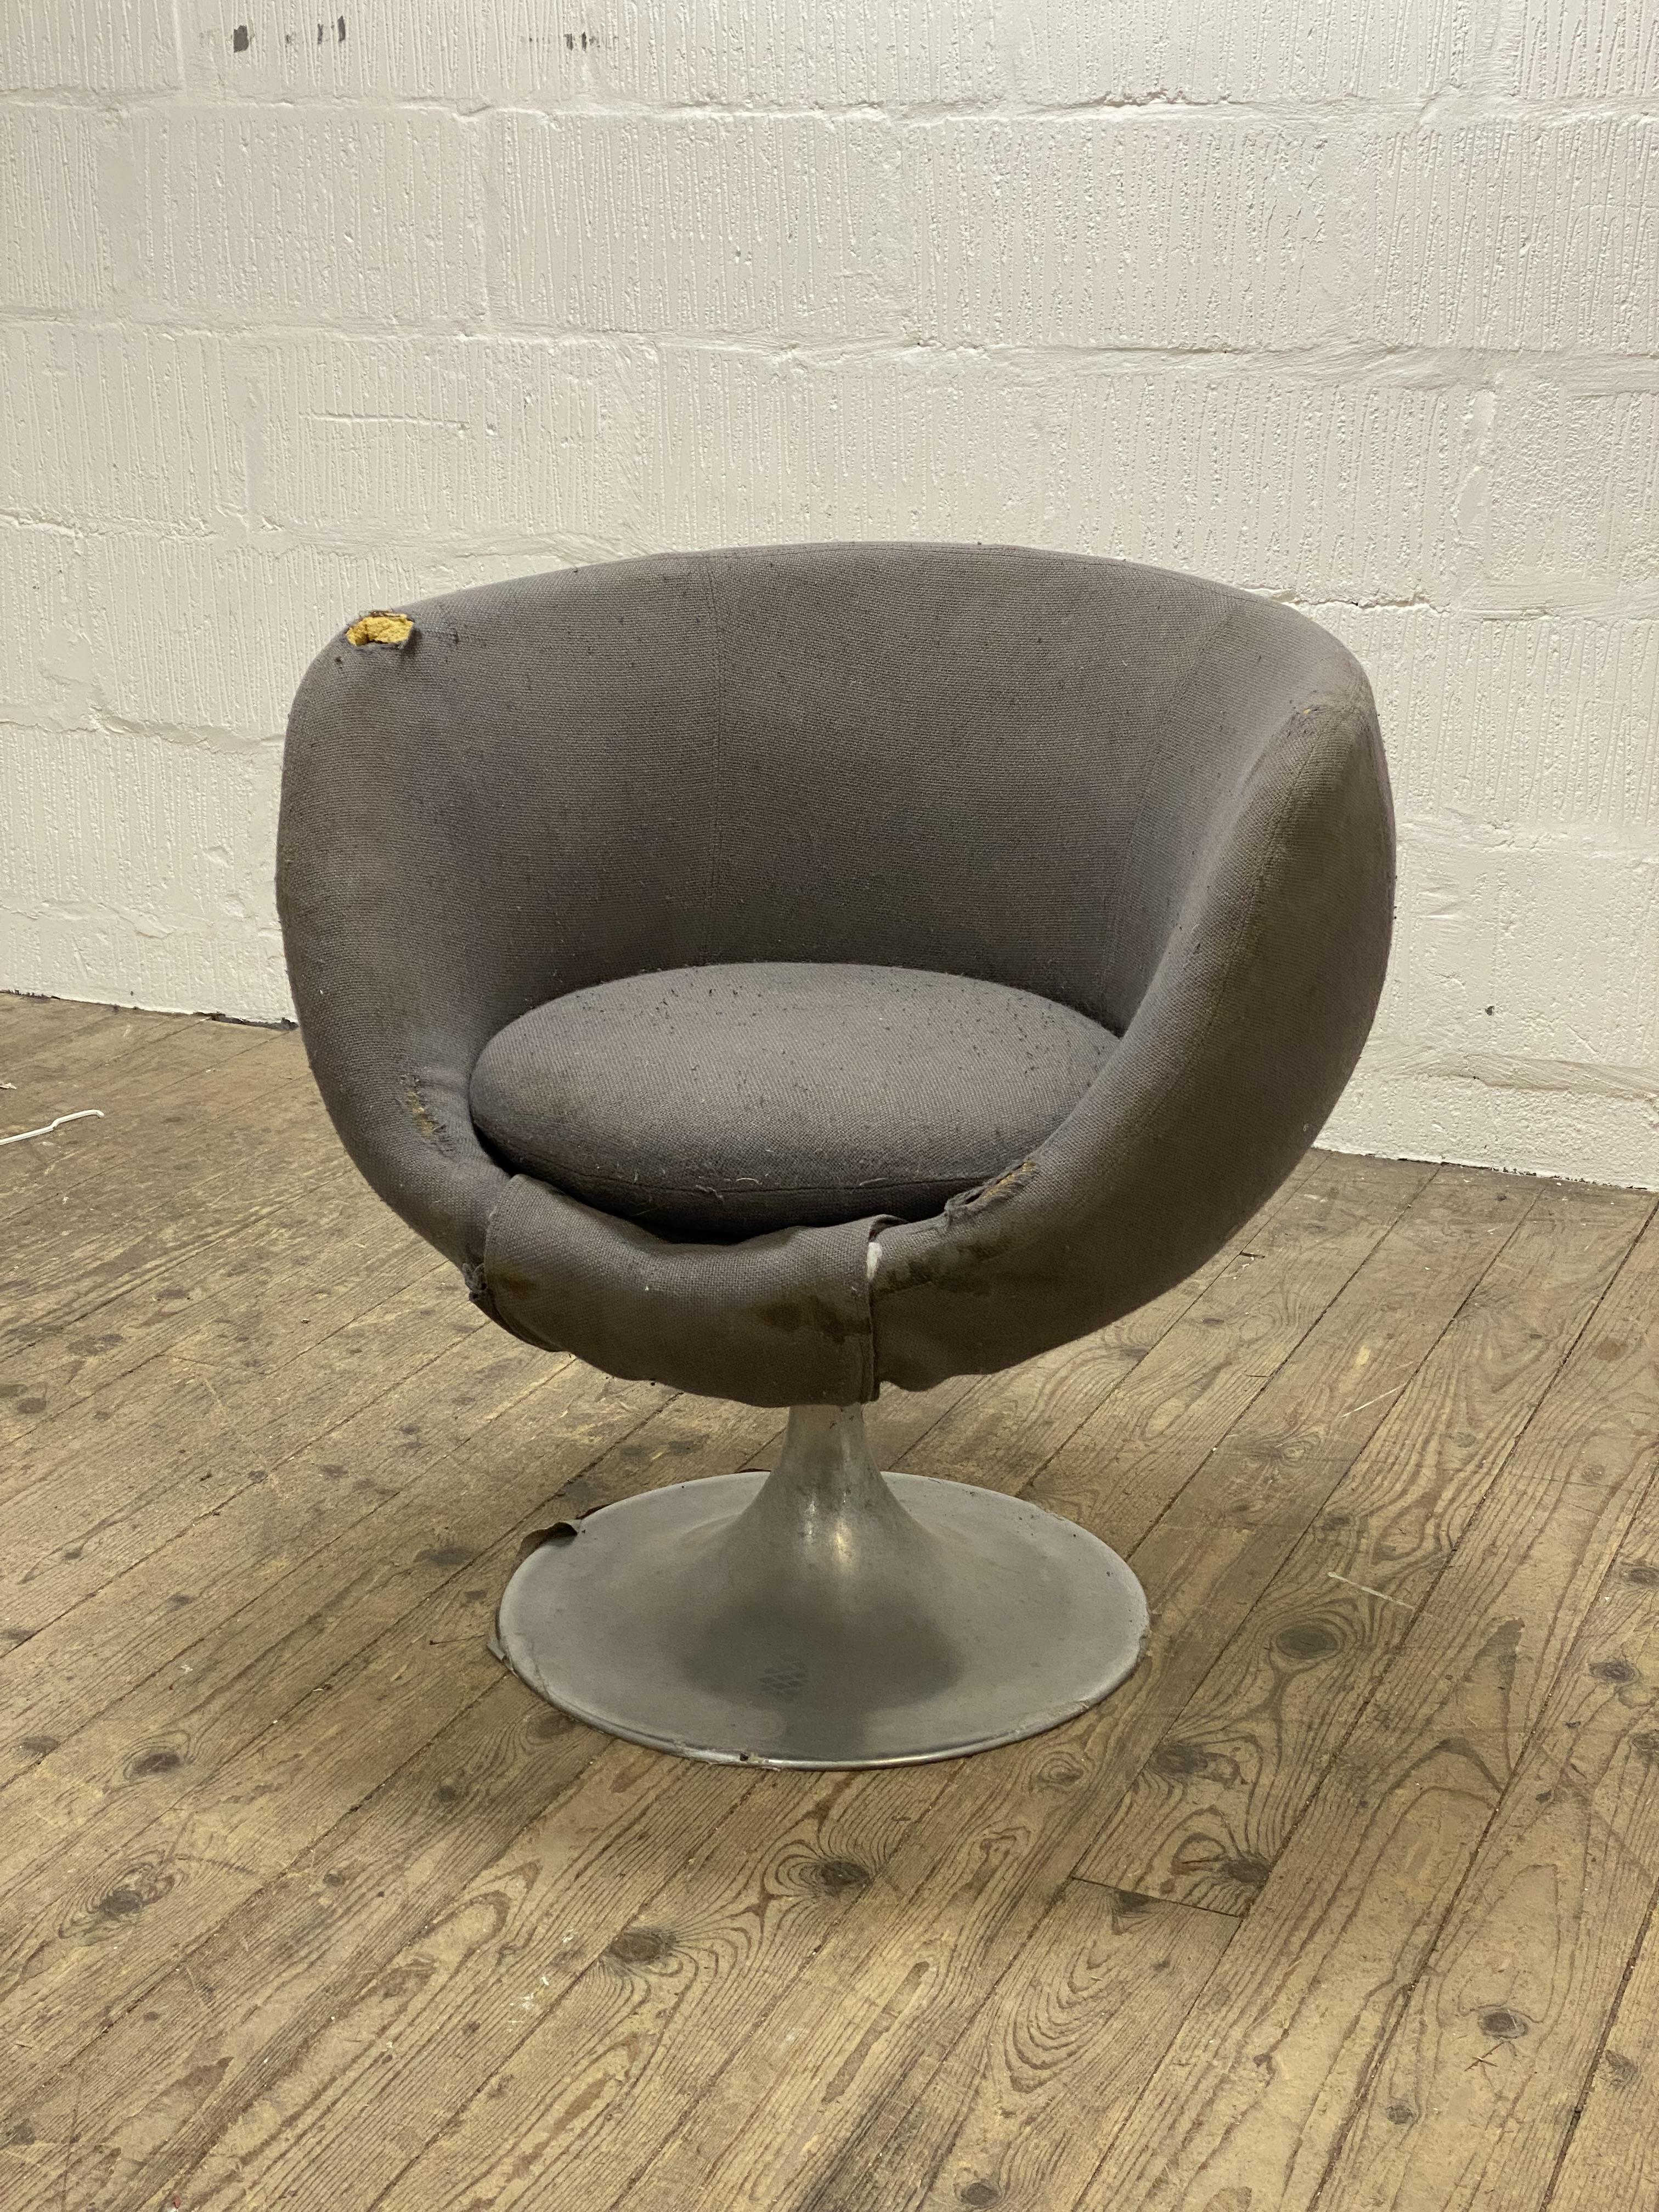 Attributed to Lennart Bender for Ulferts Ab, a mid century Swedish 'crocus' lounge chair, circa - Image 2 of 2